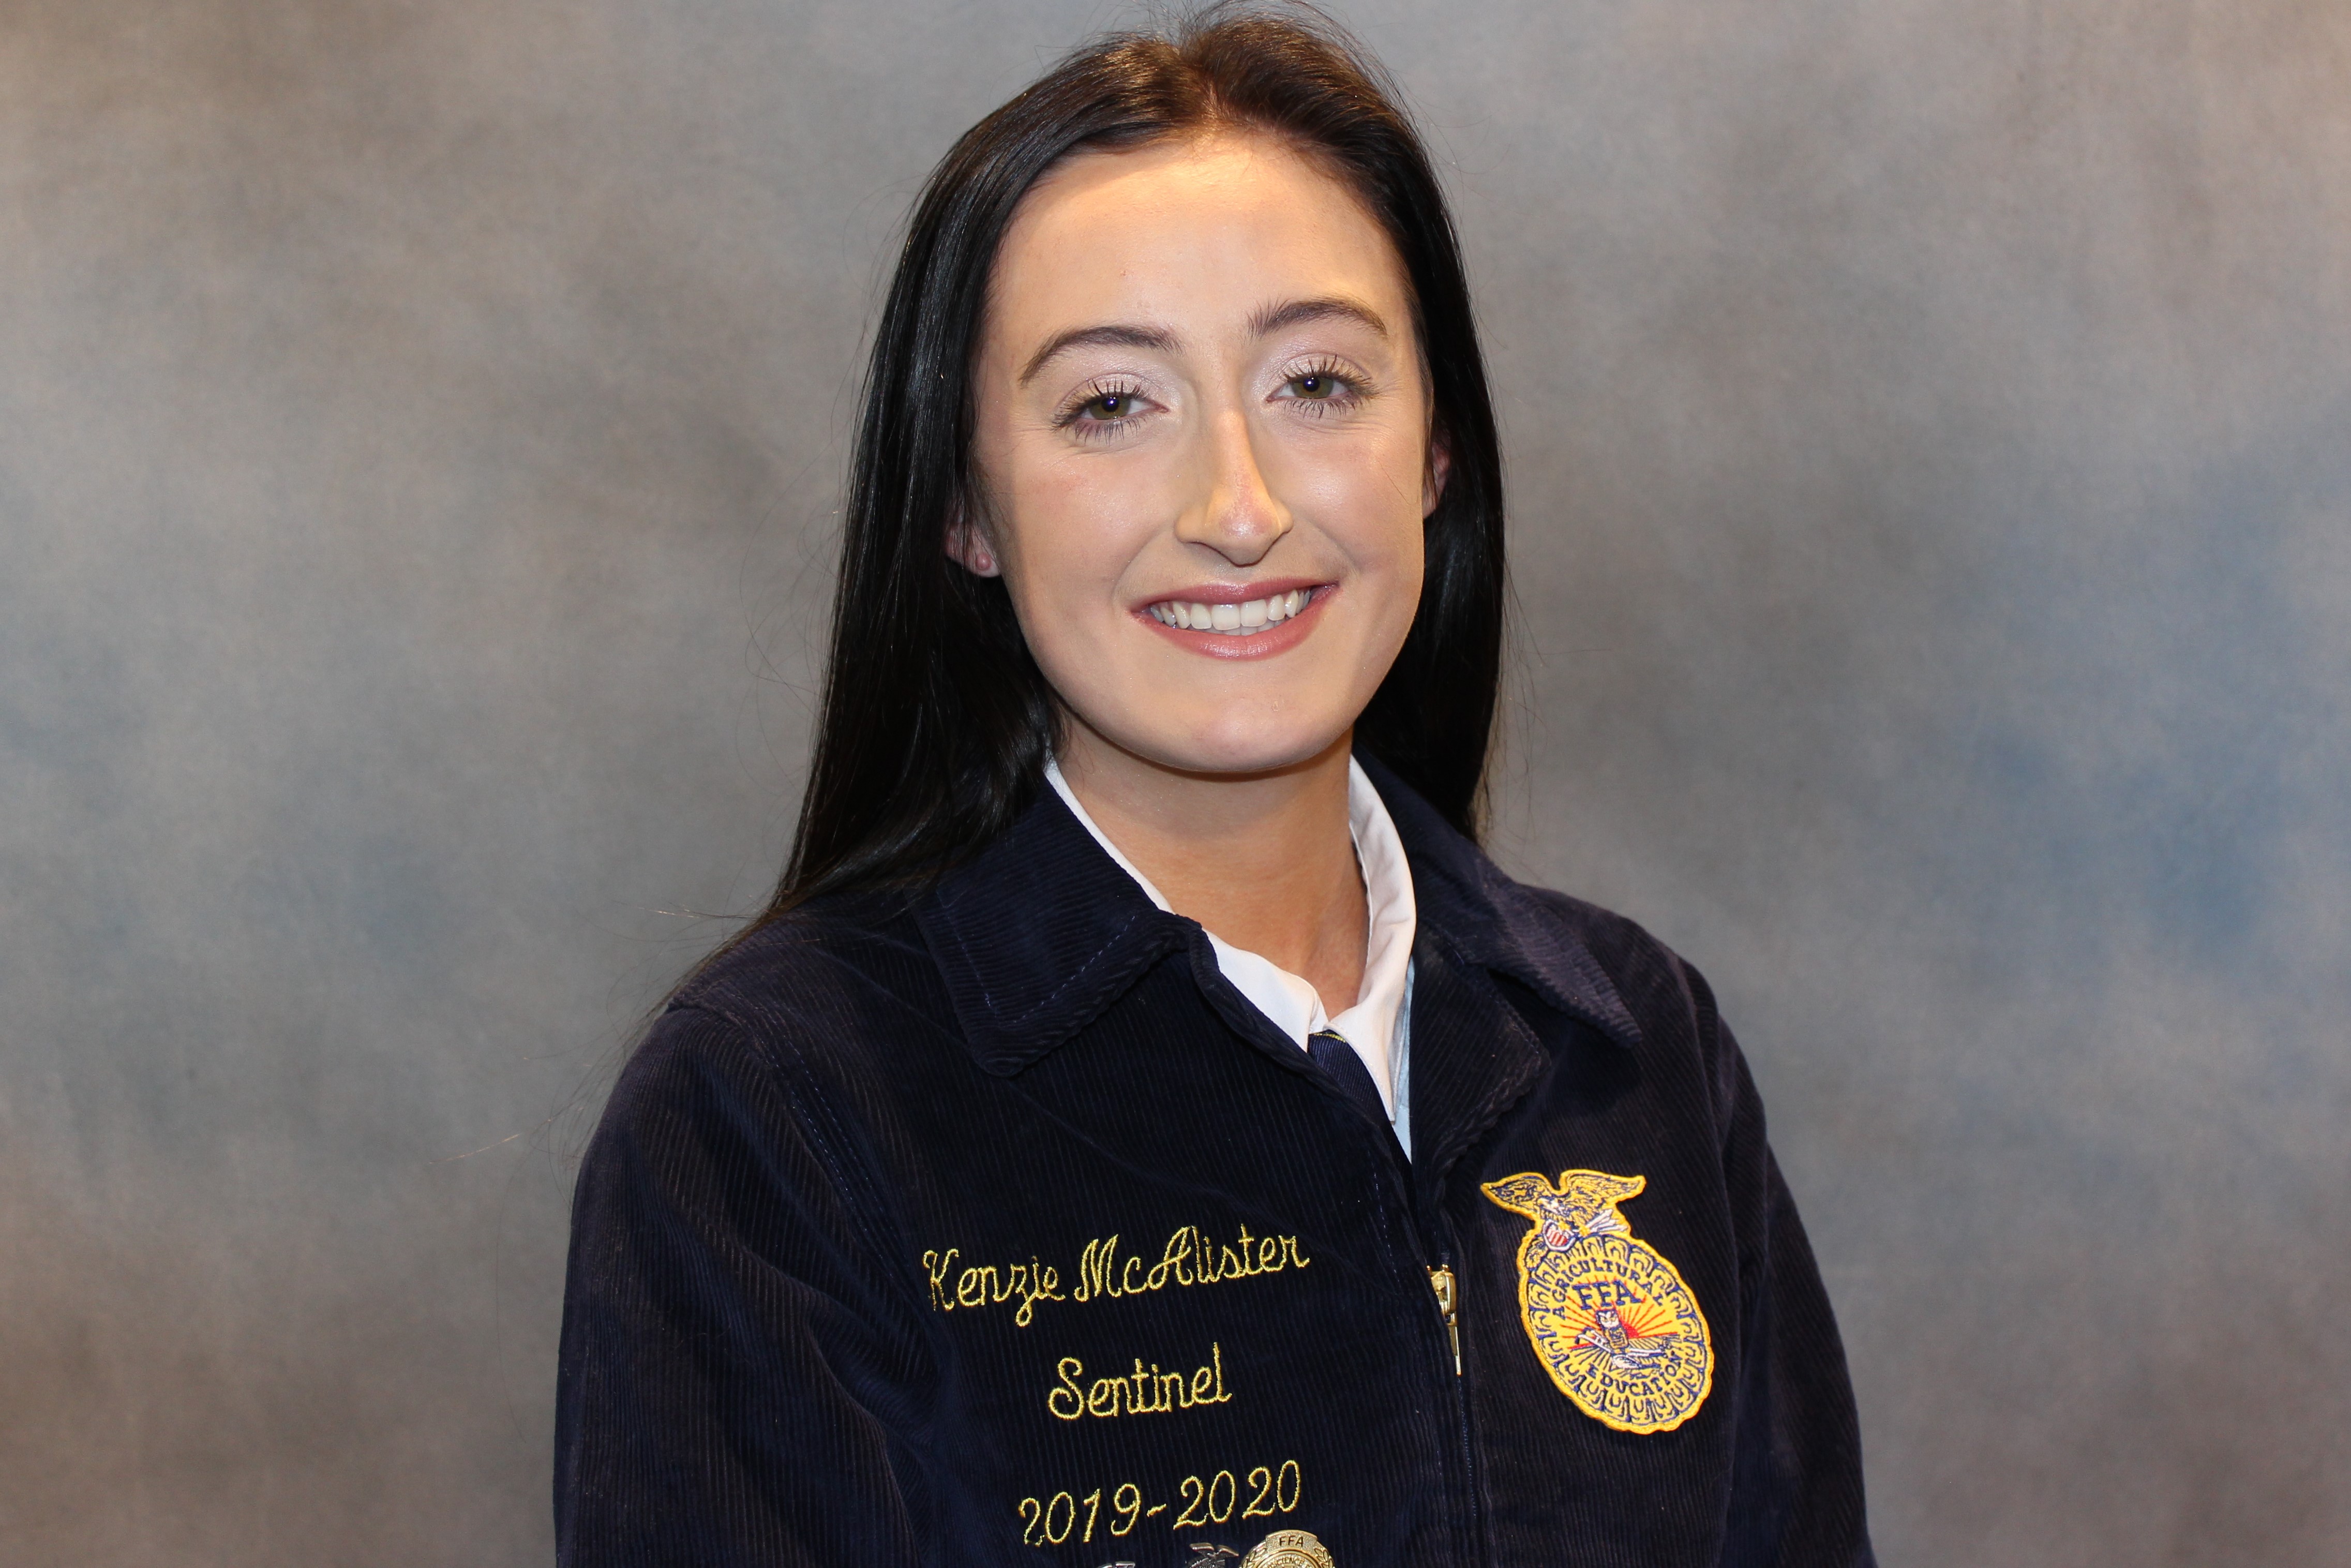 Introducing Kenzie McAlister of the Stillwater FFA Chapter, Your 2021 Central Area Star in Agriscience